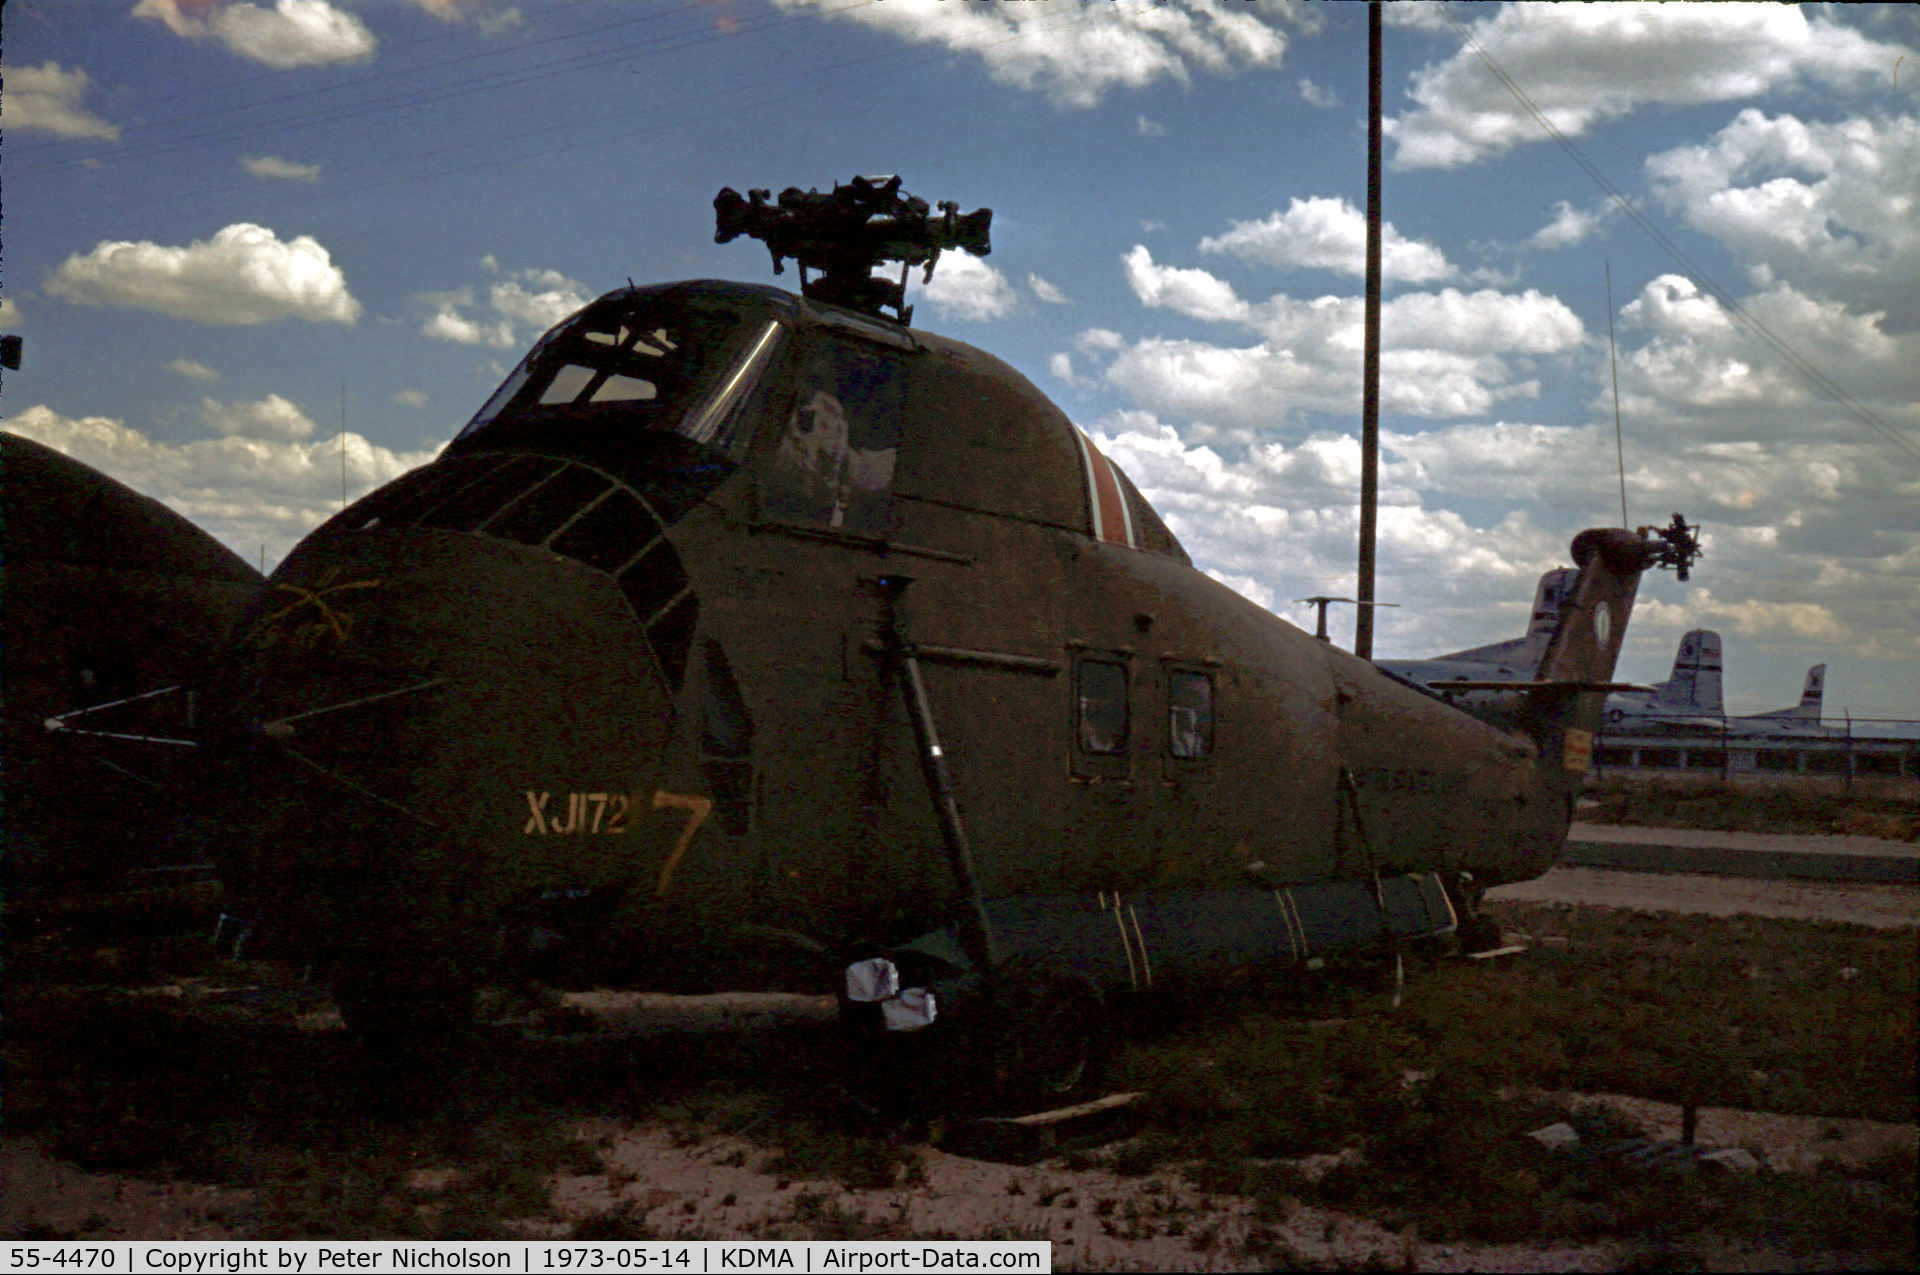 55-4470, 1955 Sikorsky CH-34C Choctaw C/N 58-428, US Army CH-34C Choctaw in storage at what was then known as the Military Aircraft Storage & Disposition Centre - MASDC - in May 1973.